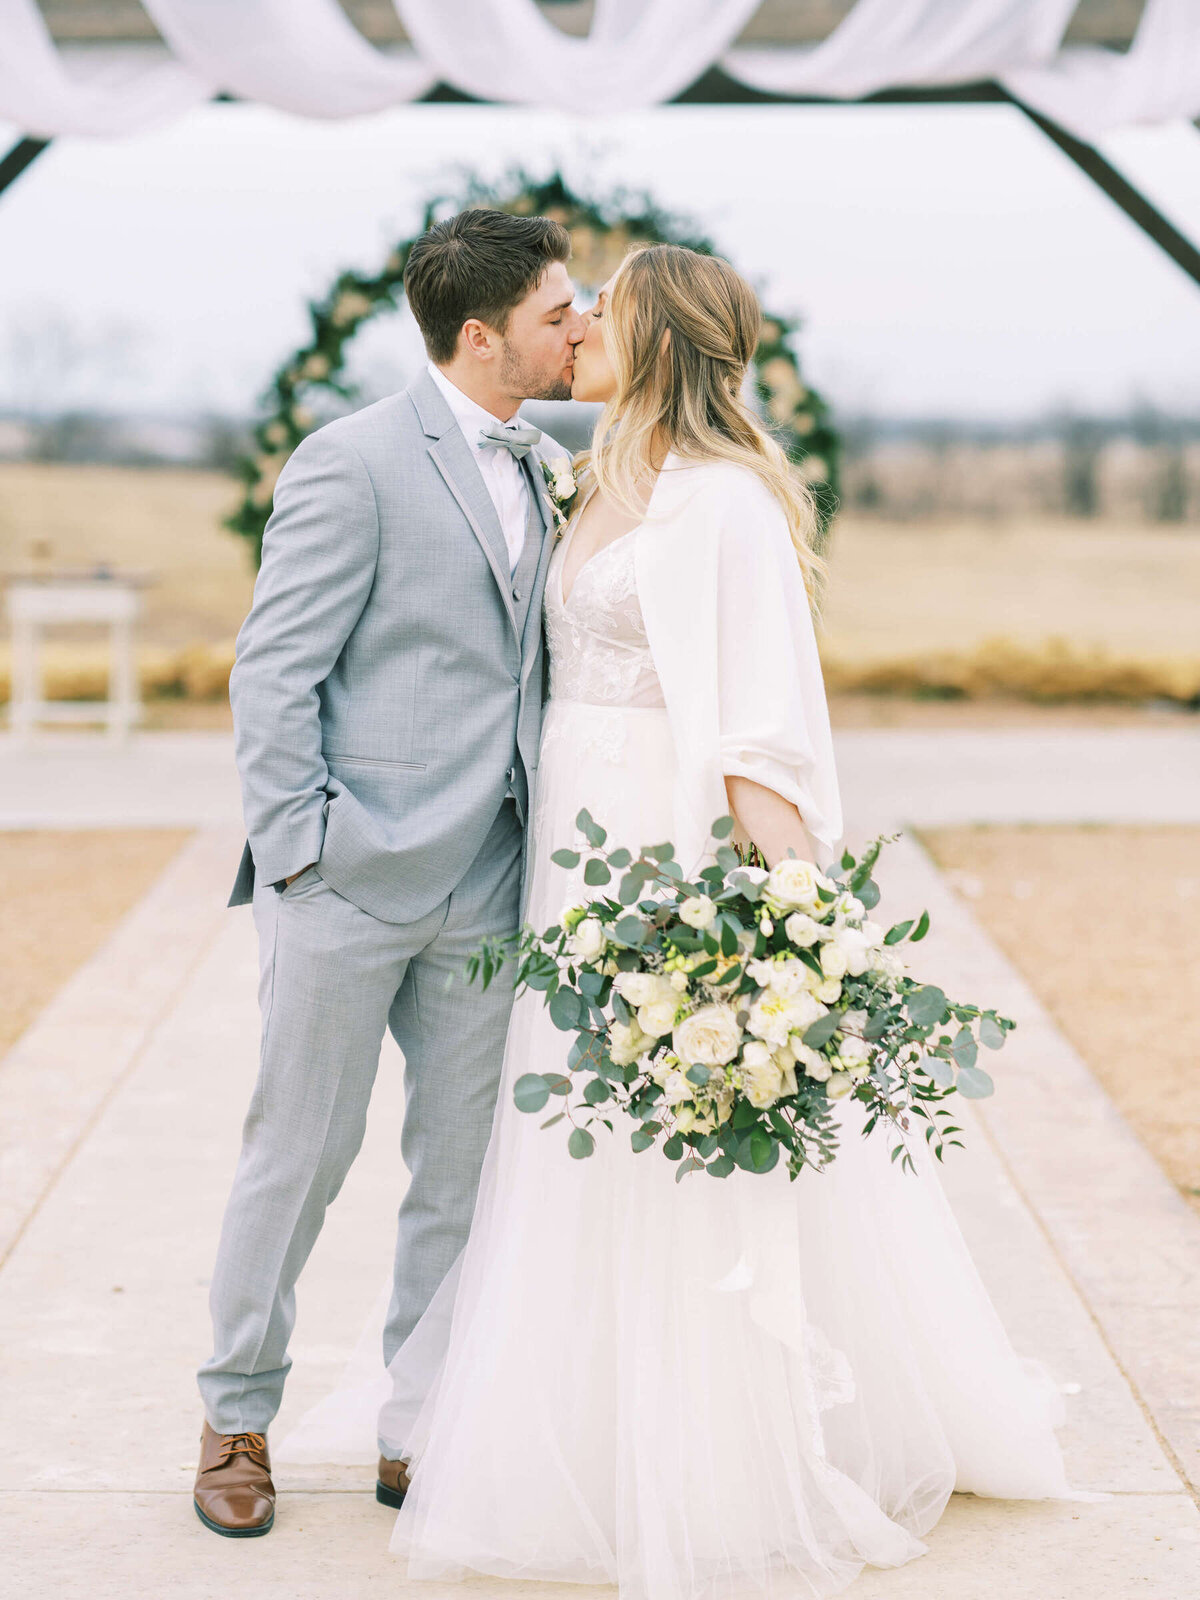 Bride and groom kiss at outdoor wedding in January